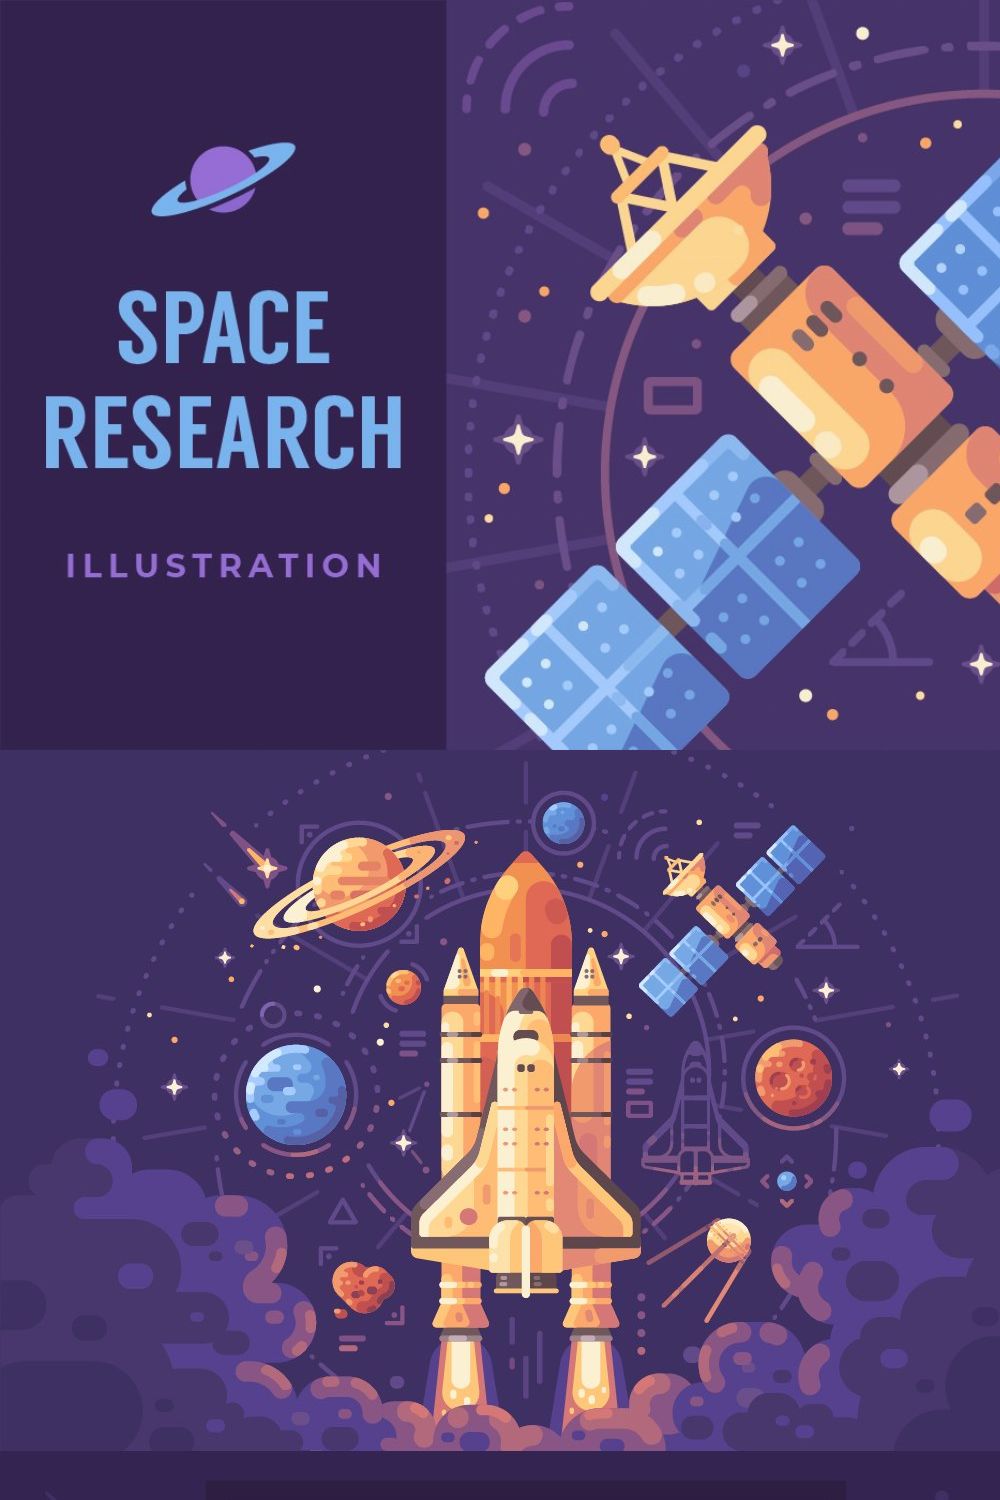 Space research pinterest preview image.